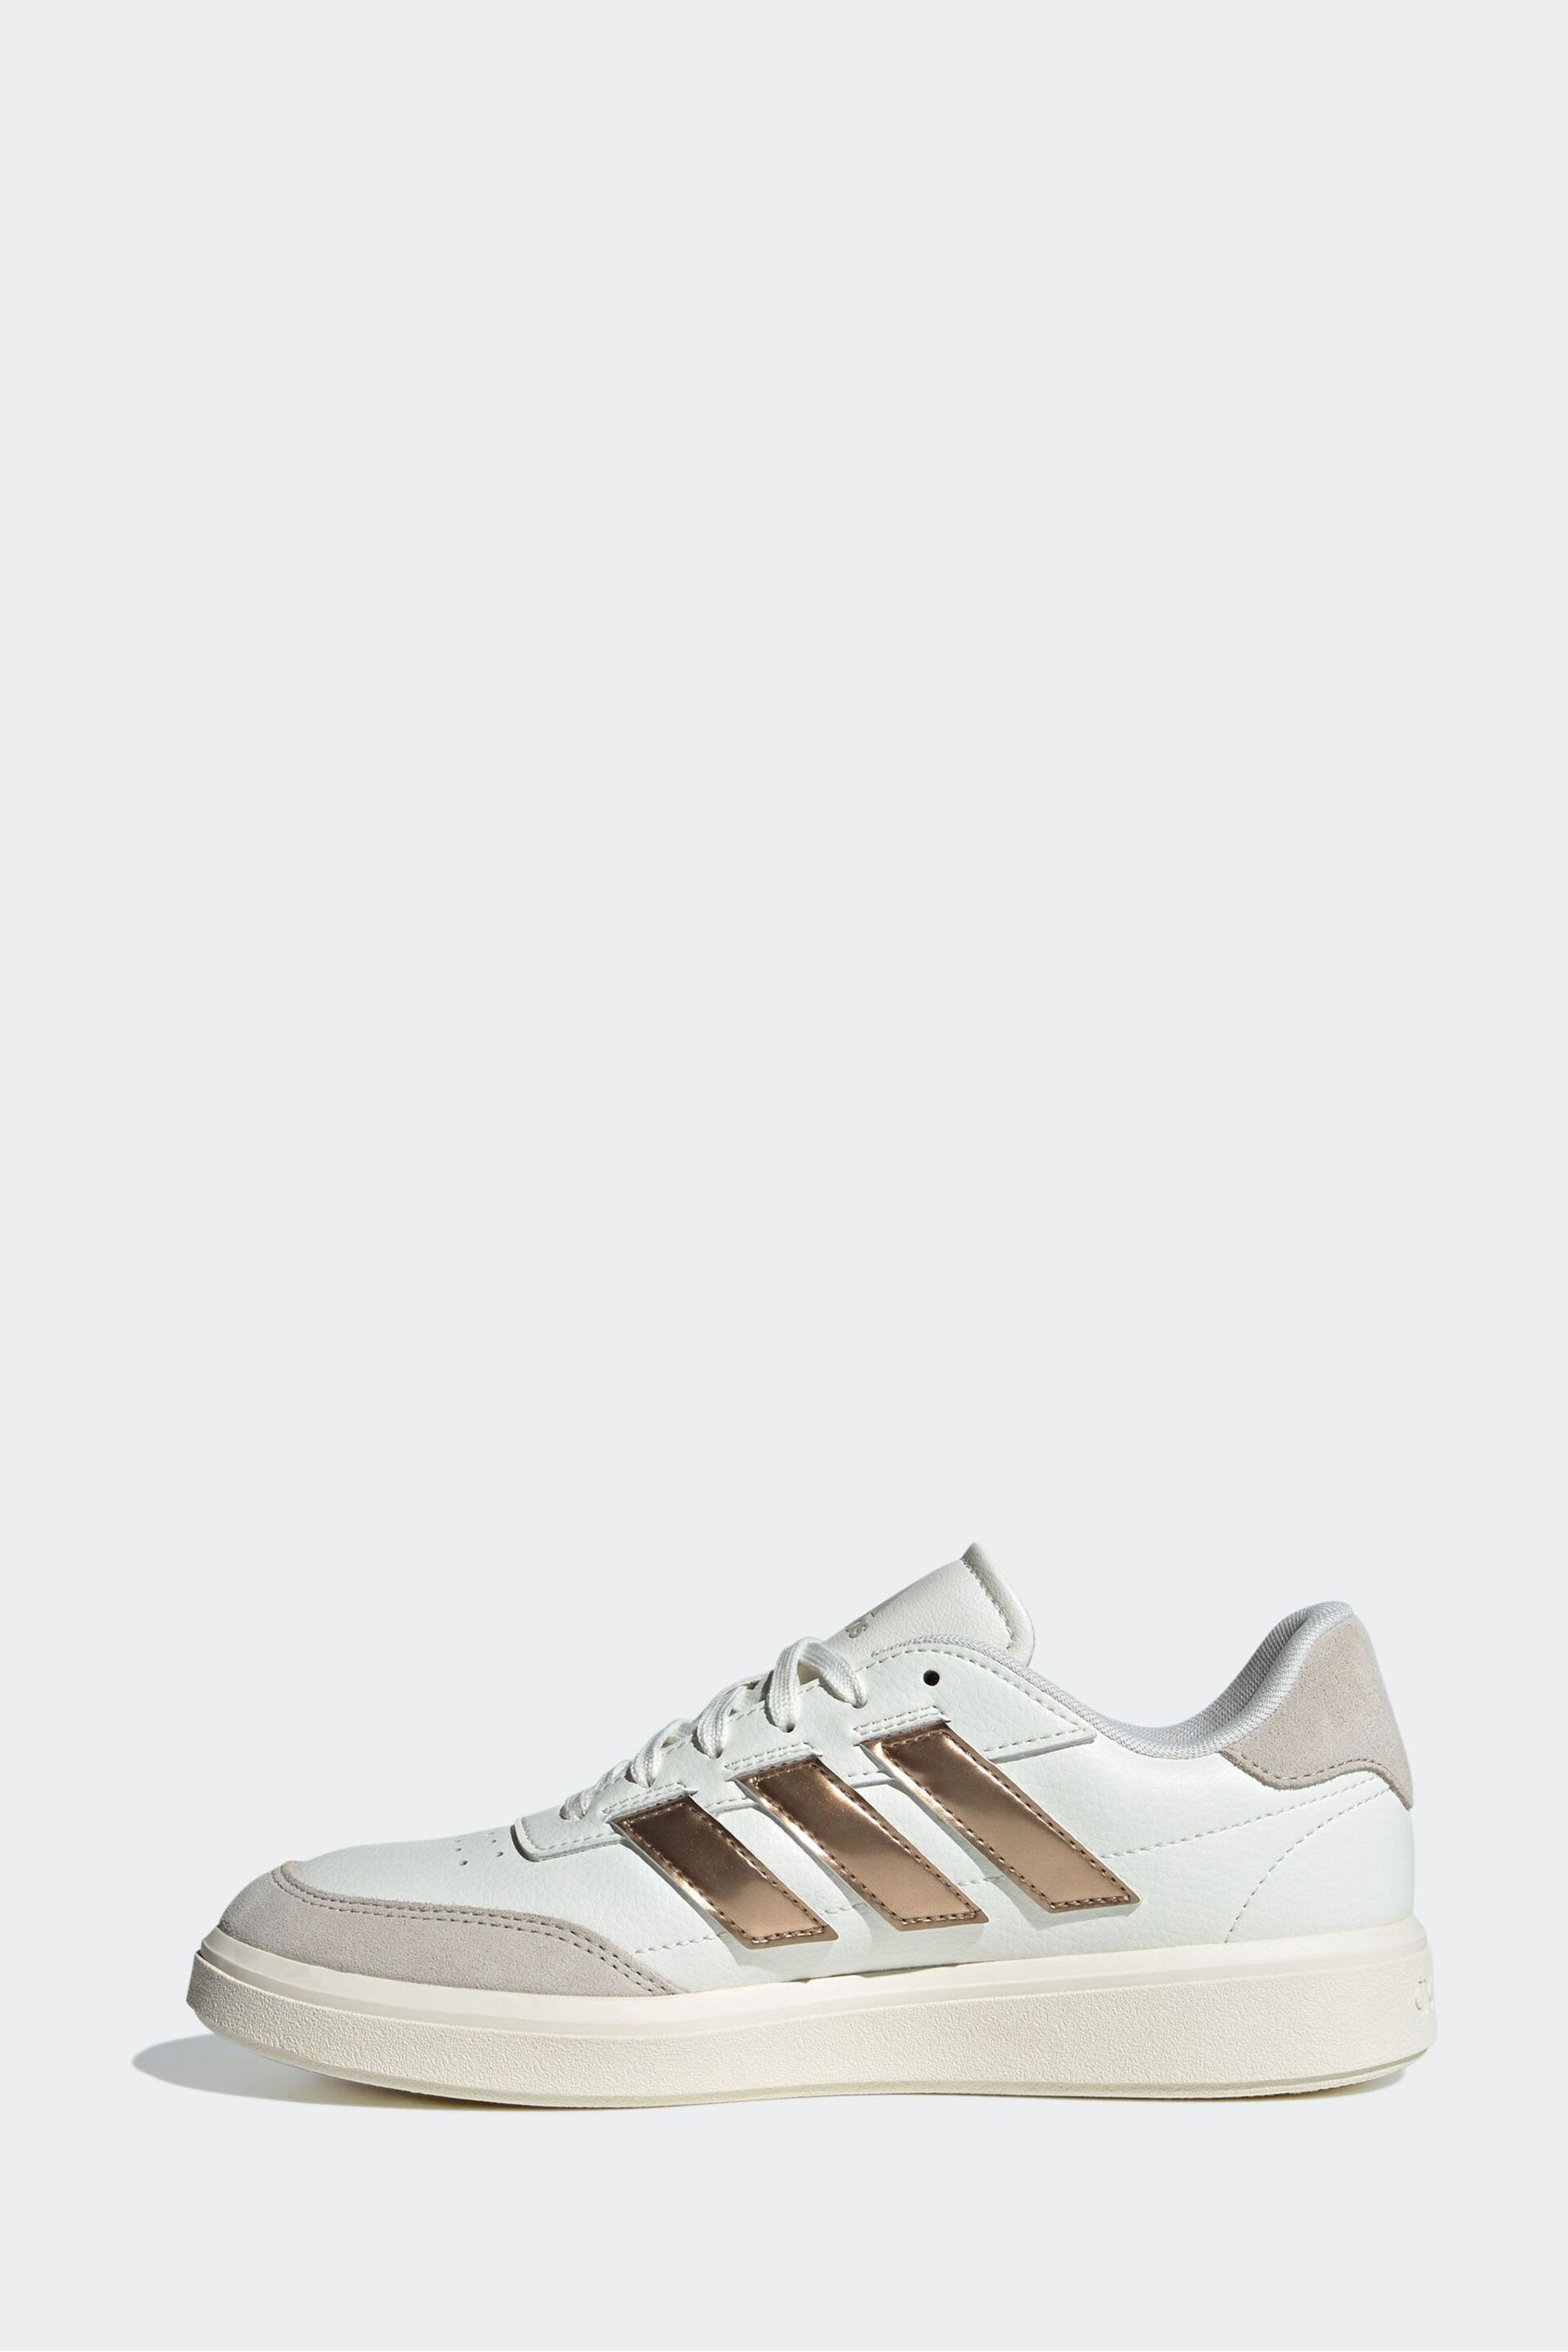 adidas Beige Court Block Trainers - Image 2 of 8